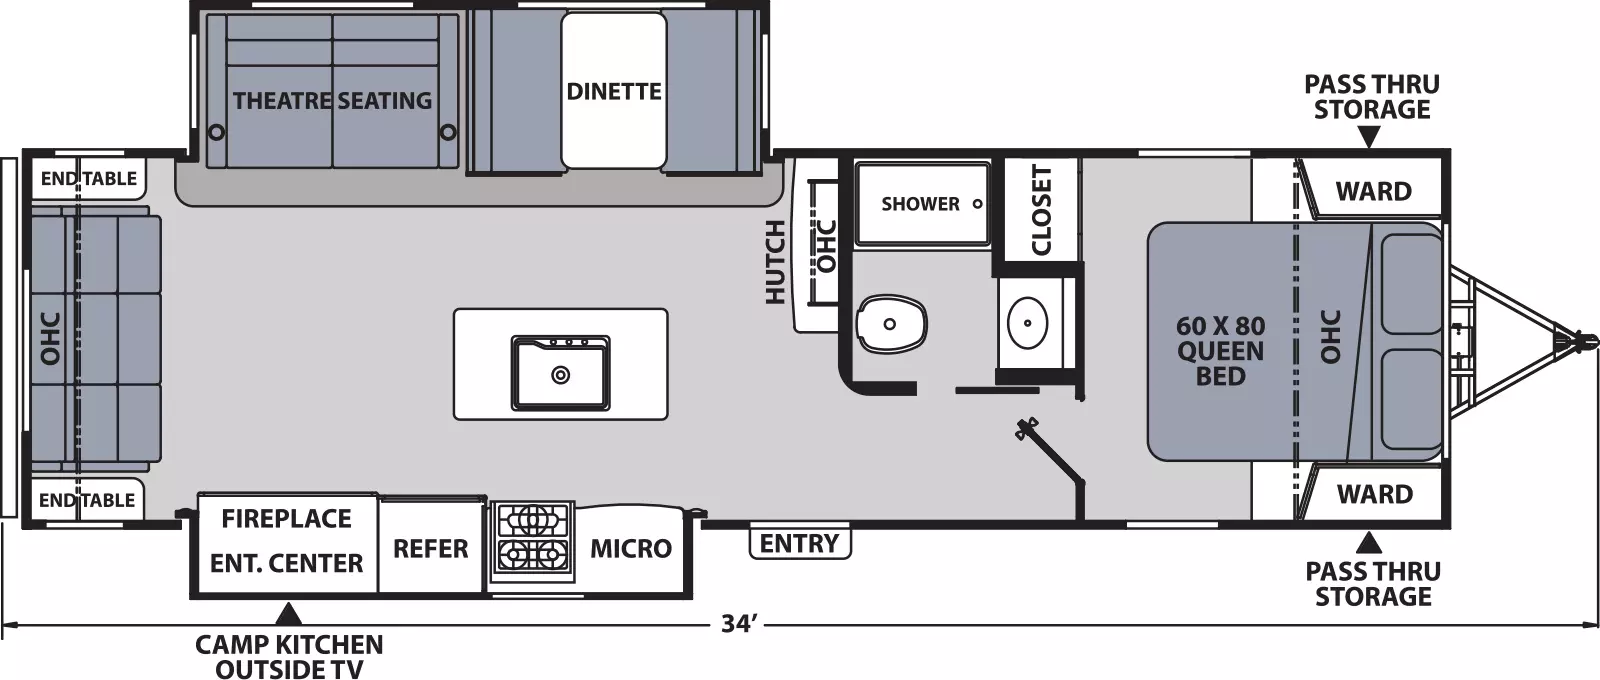 The 293RLDS has two slide outs, one on the off-door side and one on the door side, and one entry door on the door side. Interior layout from front to back: front bedroom with foot facing queen bed, overhead cabinet, wardrobes on either side of the bed, and closet on off-door side; off door side side aisle bathroom; hutch with overhead cabinet on off-door side. off-door side slide out containing dinette and theater seating; kitchen island with sink; door side slide out with kitchen containing microwave, cook top stove, refrigerator and entertainment center with fireplace; and sofa at the rear with overhead cabinet and two end tables; exterior camp kitchen w/ outside TV towards the rear.